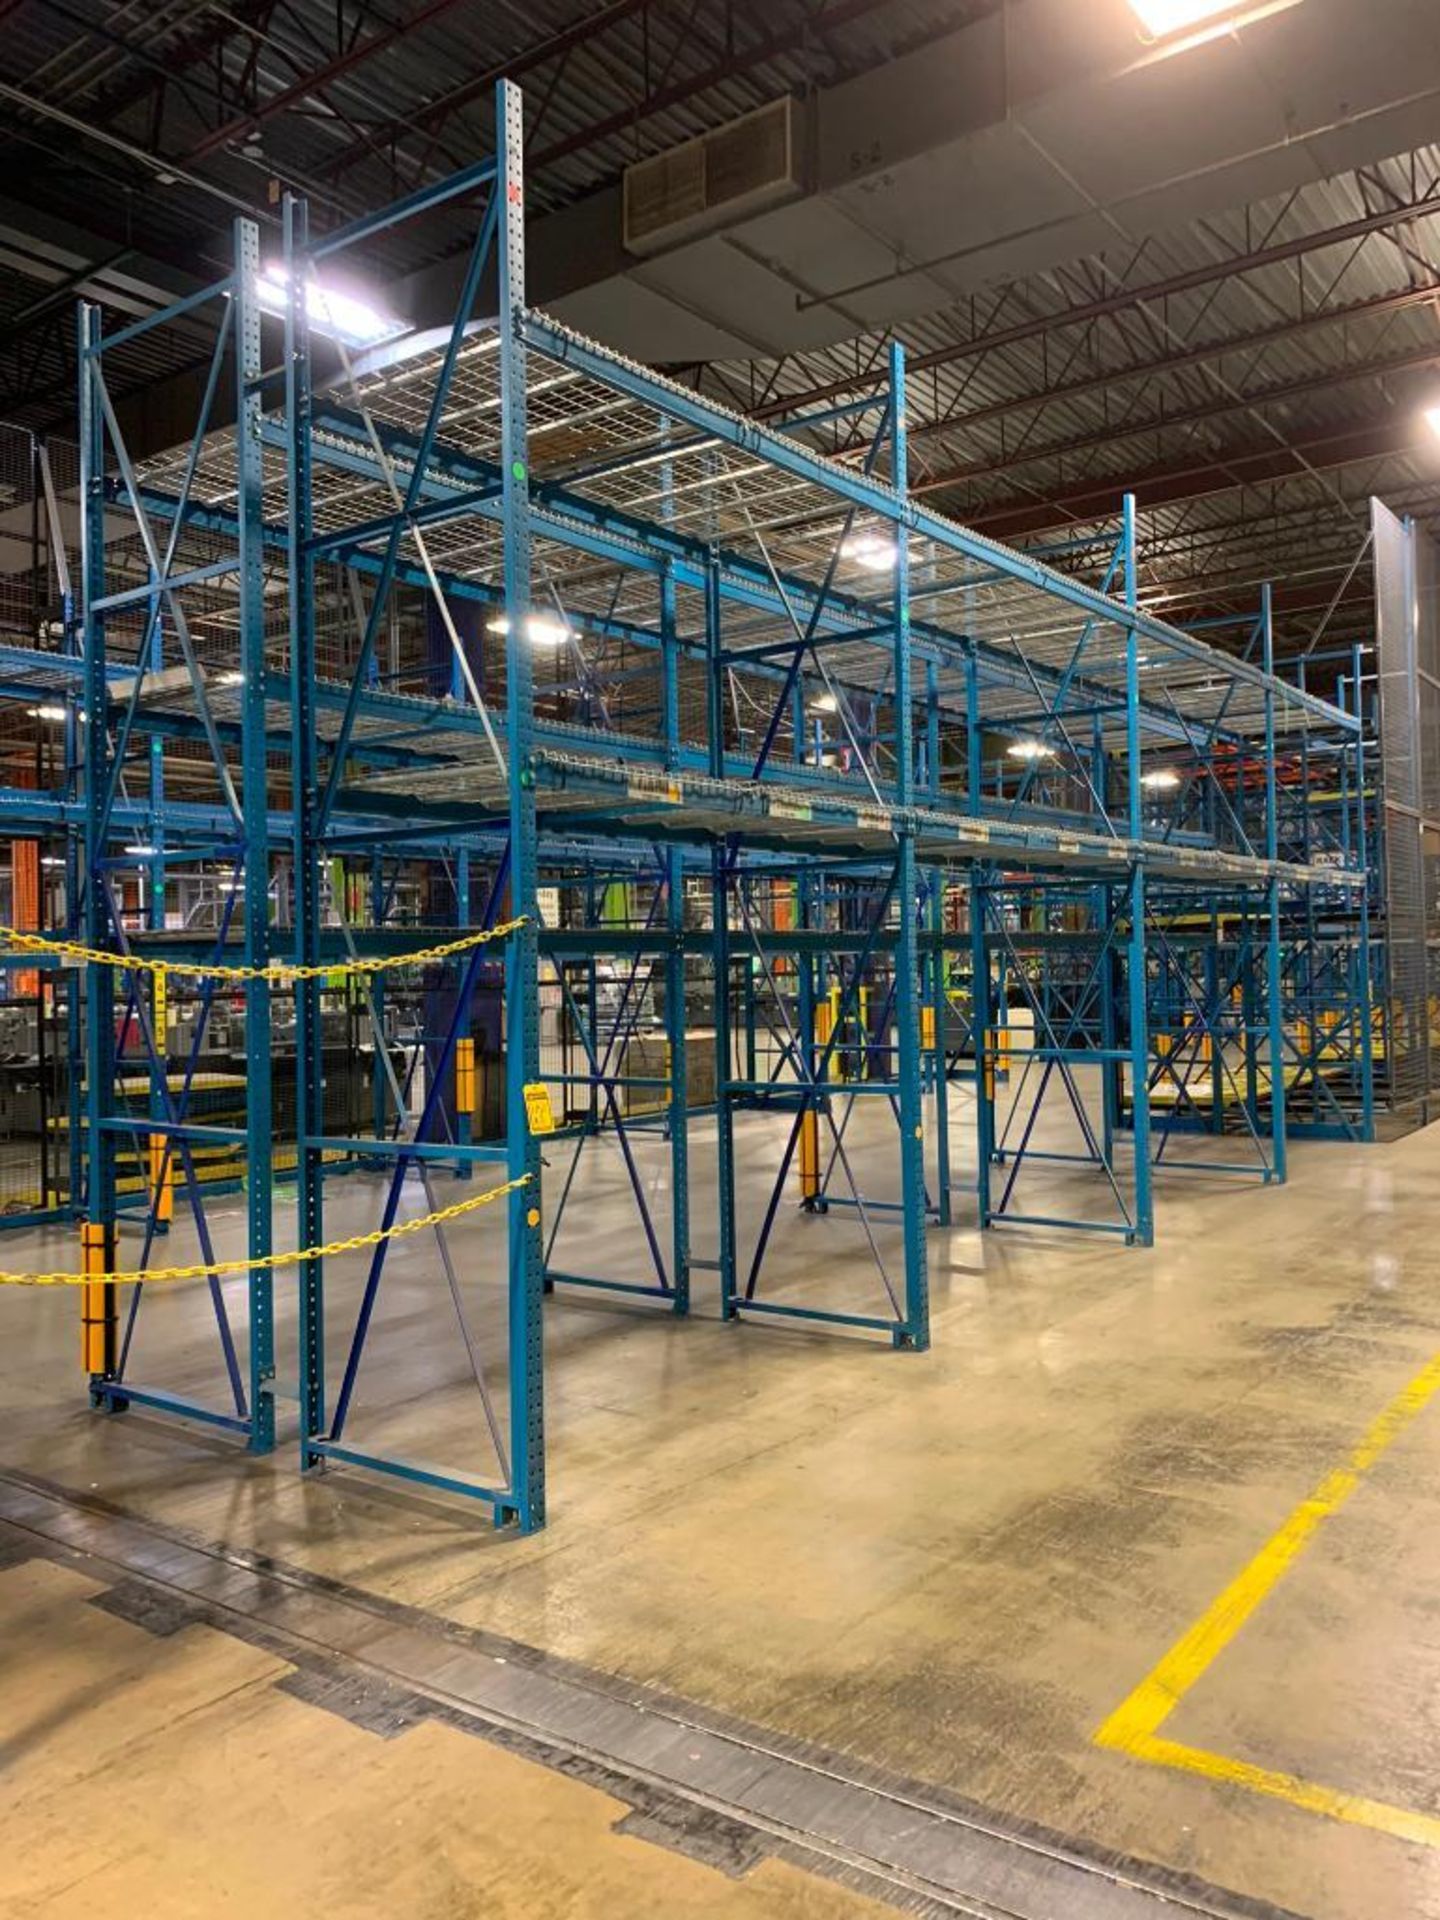 (8x) Bays of Bolt-Together Pallet Rack; (10) 15' X 44" Uprights, (40) 9' X 4" Crossbeams, (40) Wire